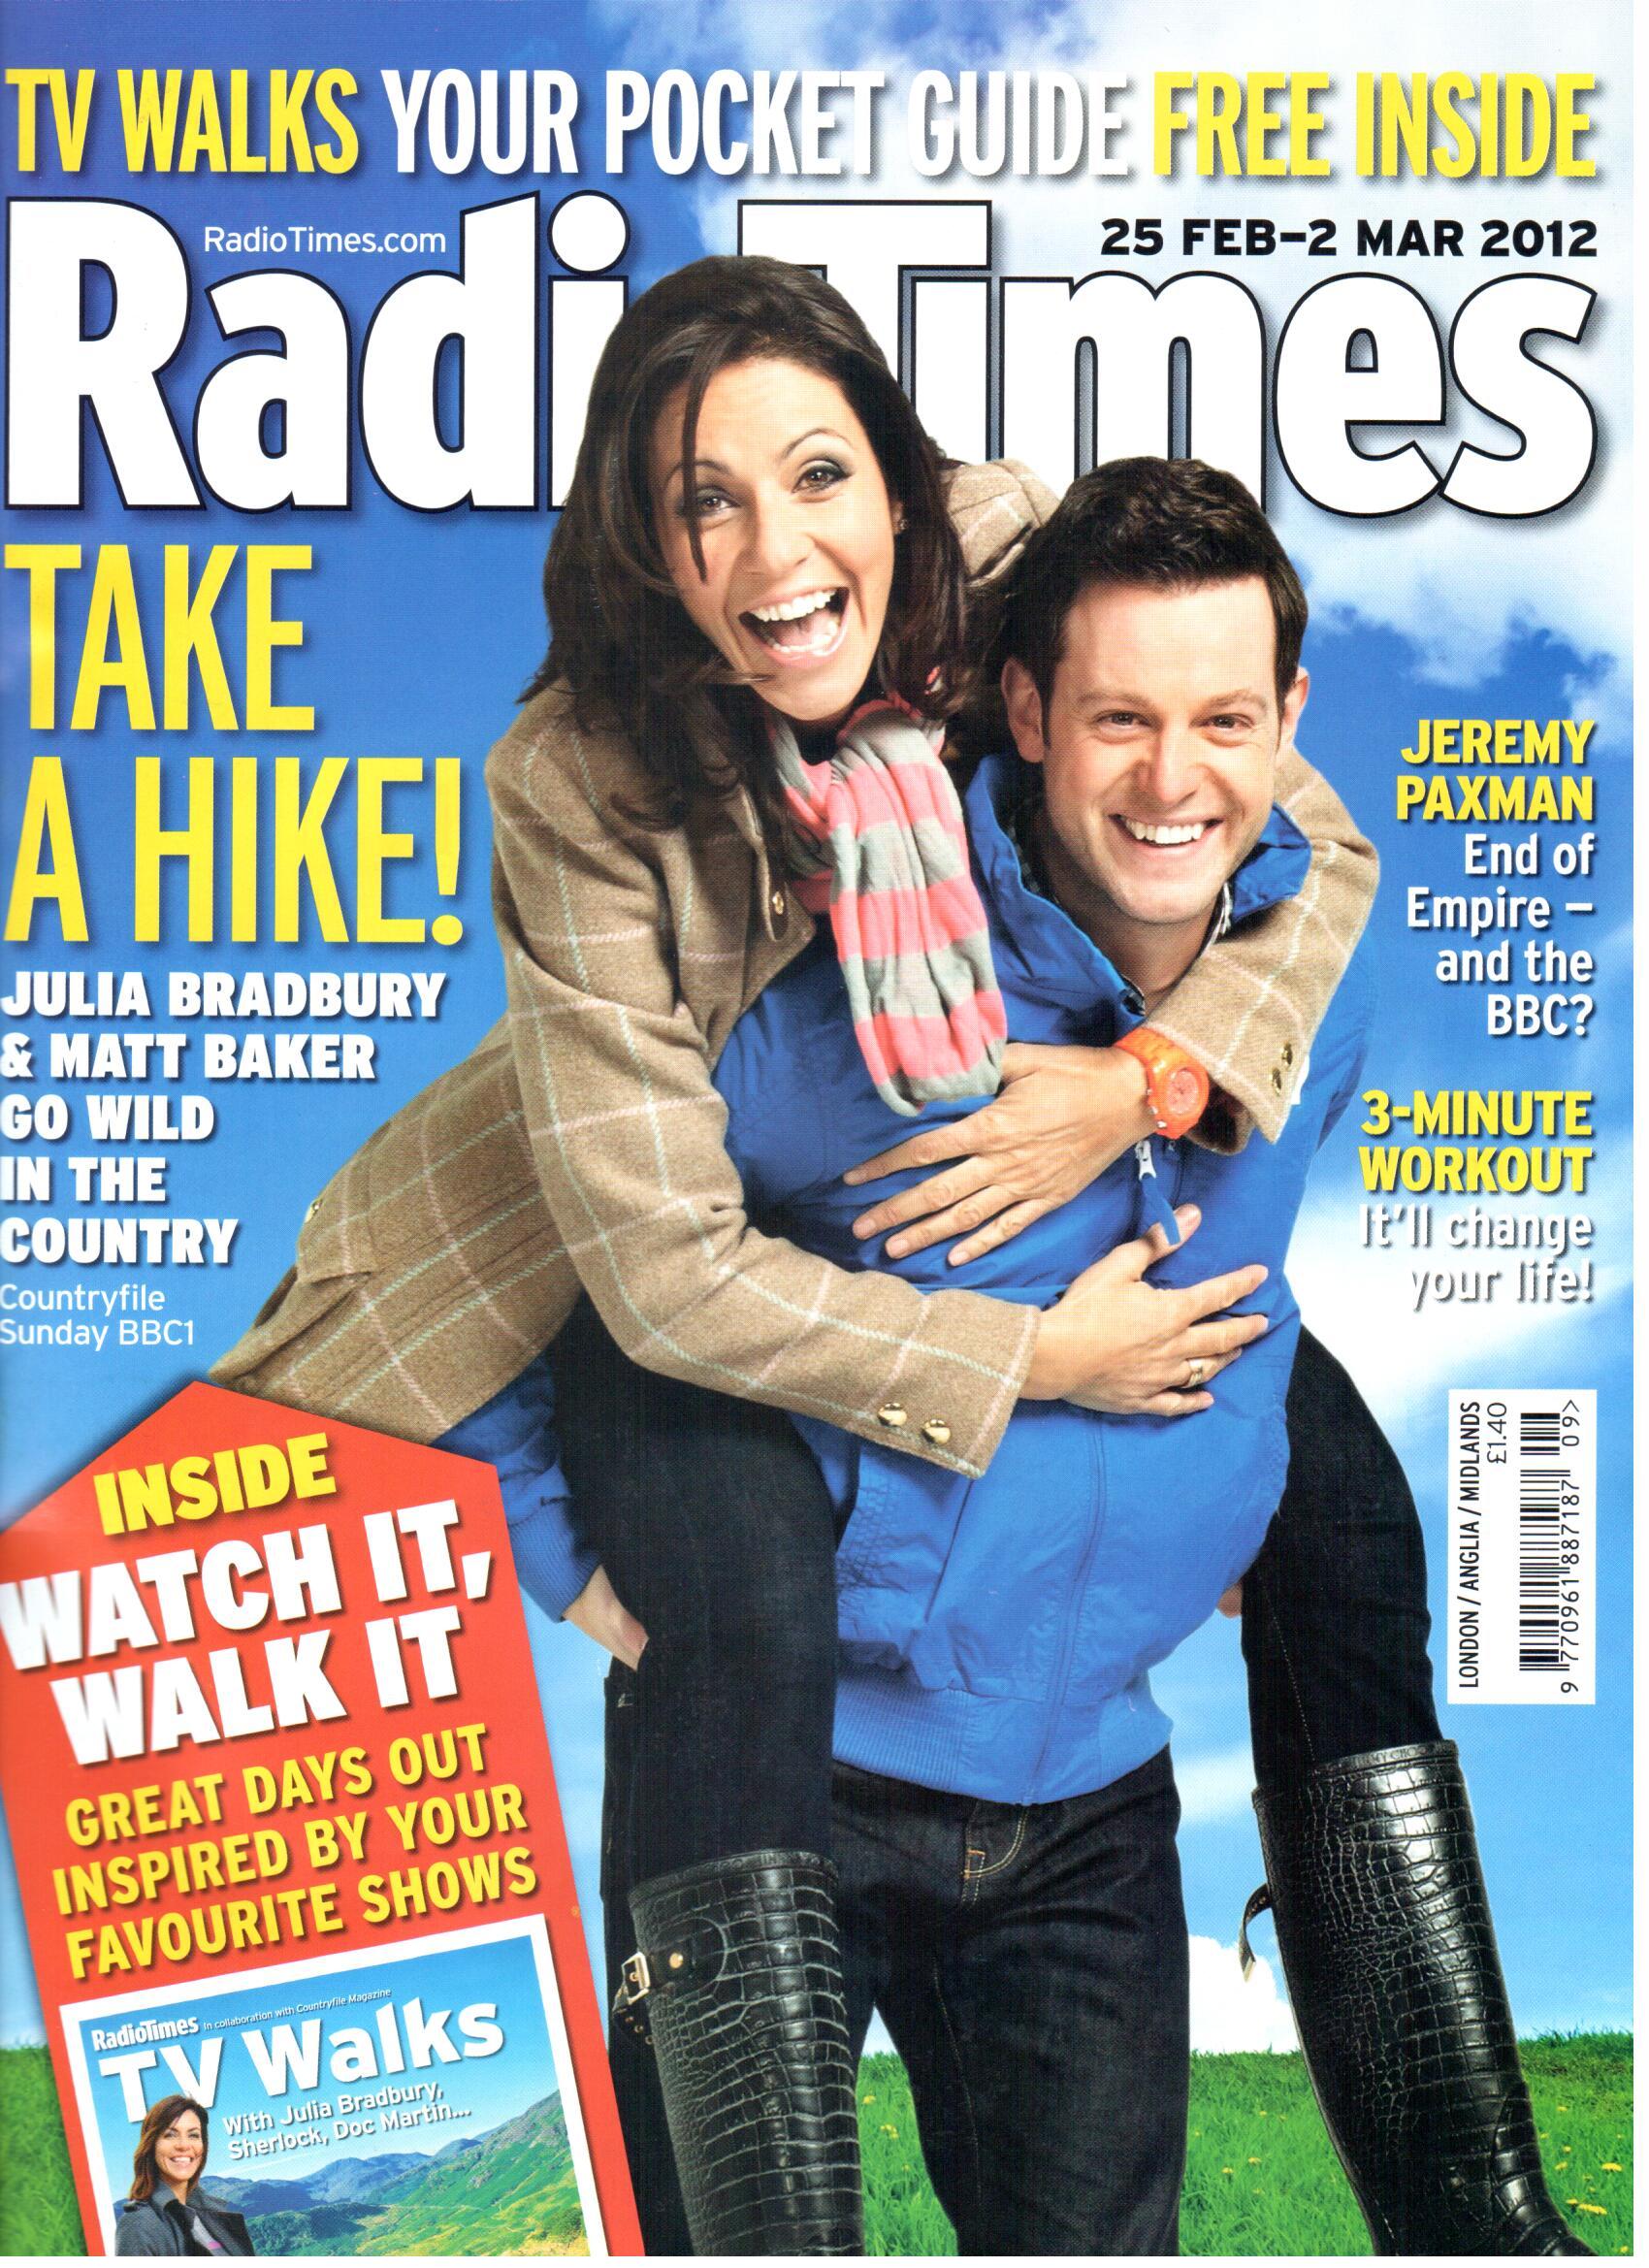 radio Times front cover 21.02.12.jpeg